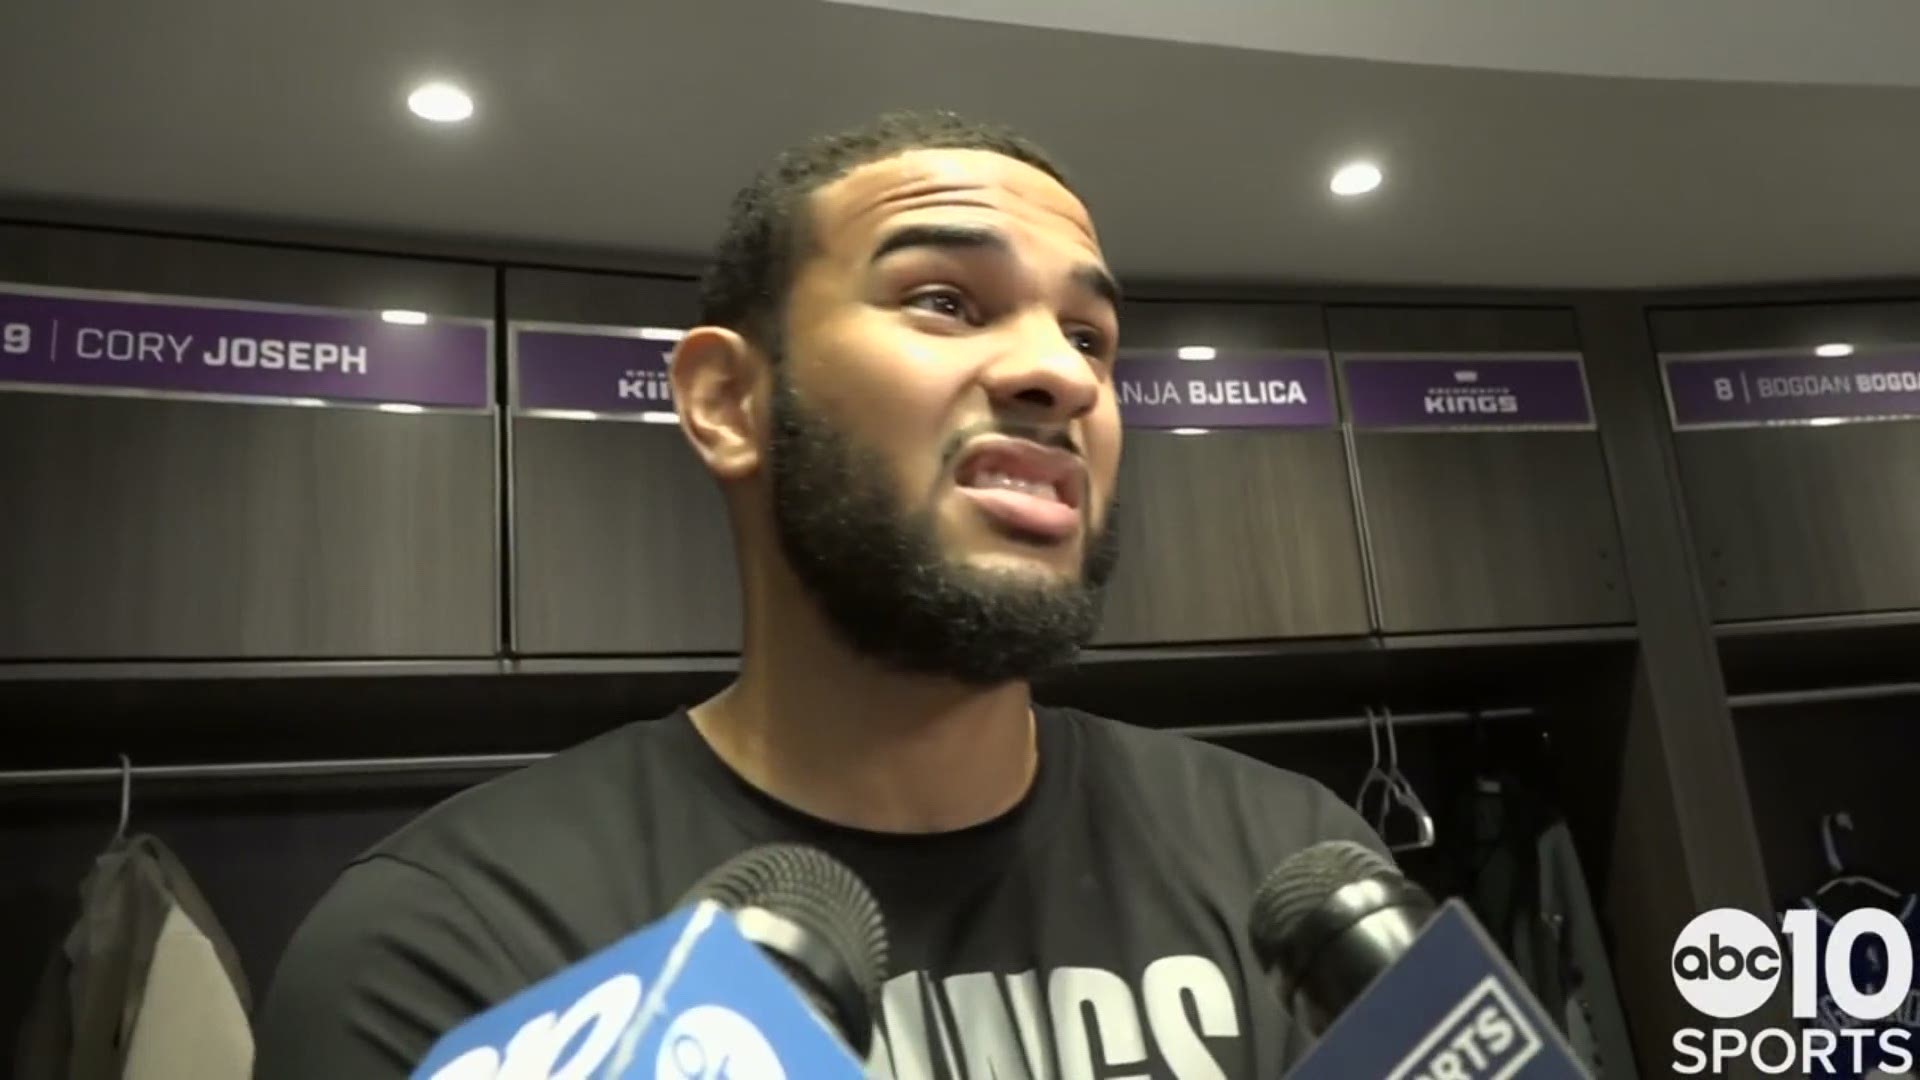 Kings PG Cory Joseph discusses getting the starting nod for Sacramento on Tuesday night against the Portland Trail Blazers, with De'Aaron Fox sidelined with injury.